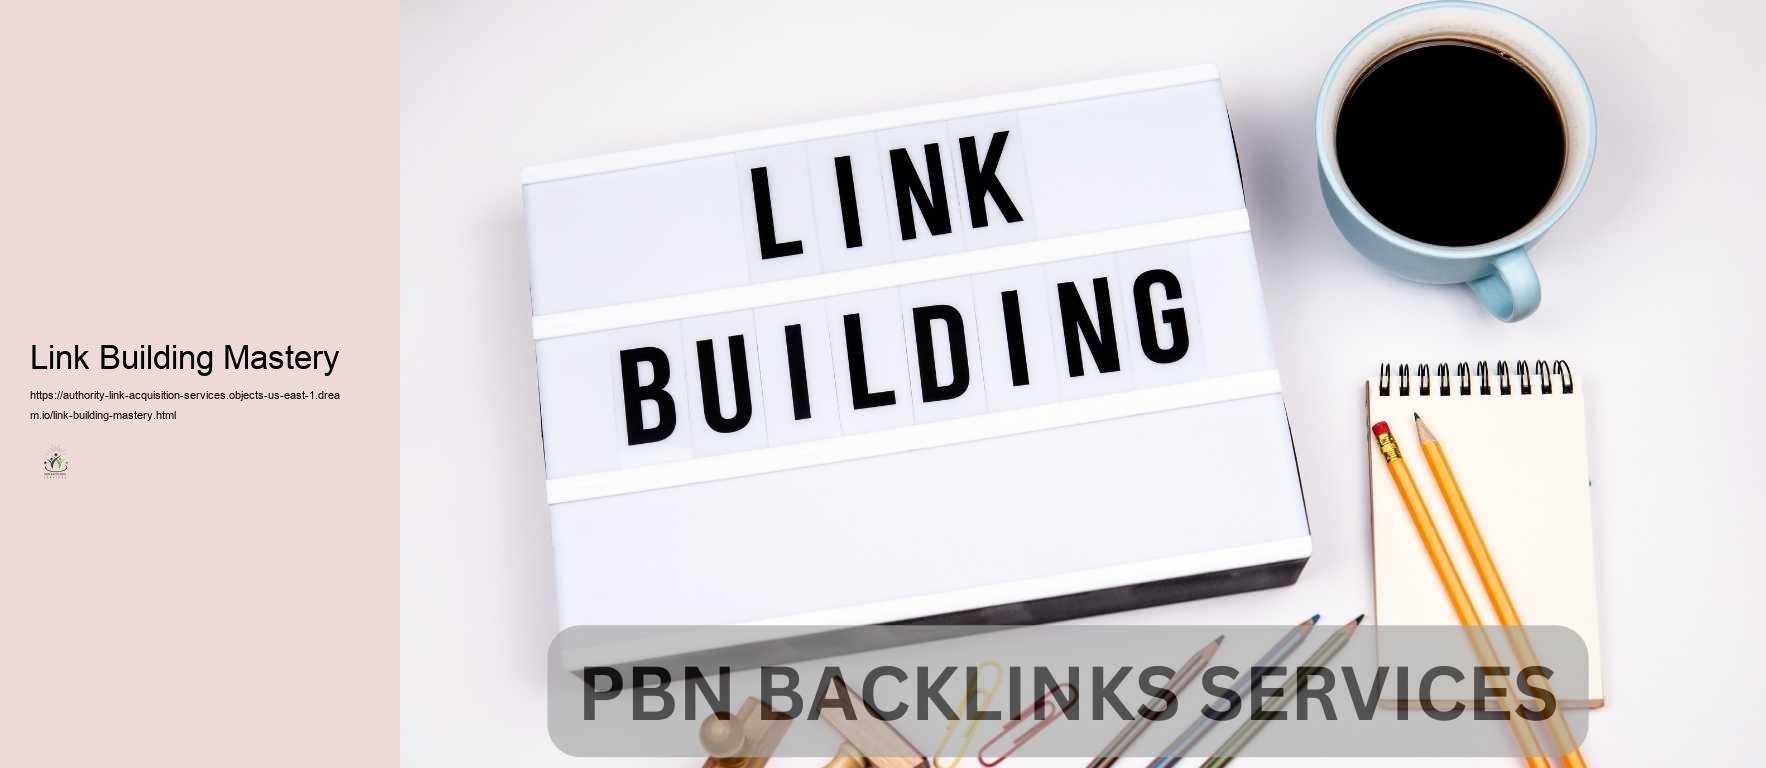 Link Building Mastery